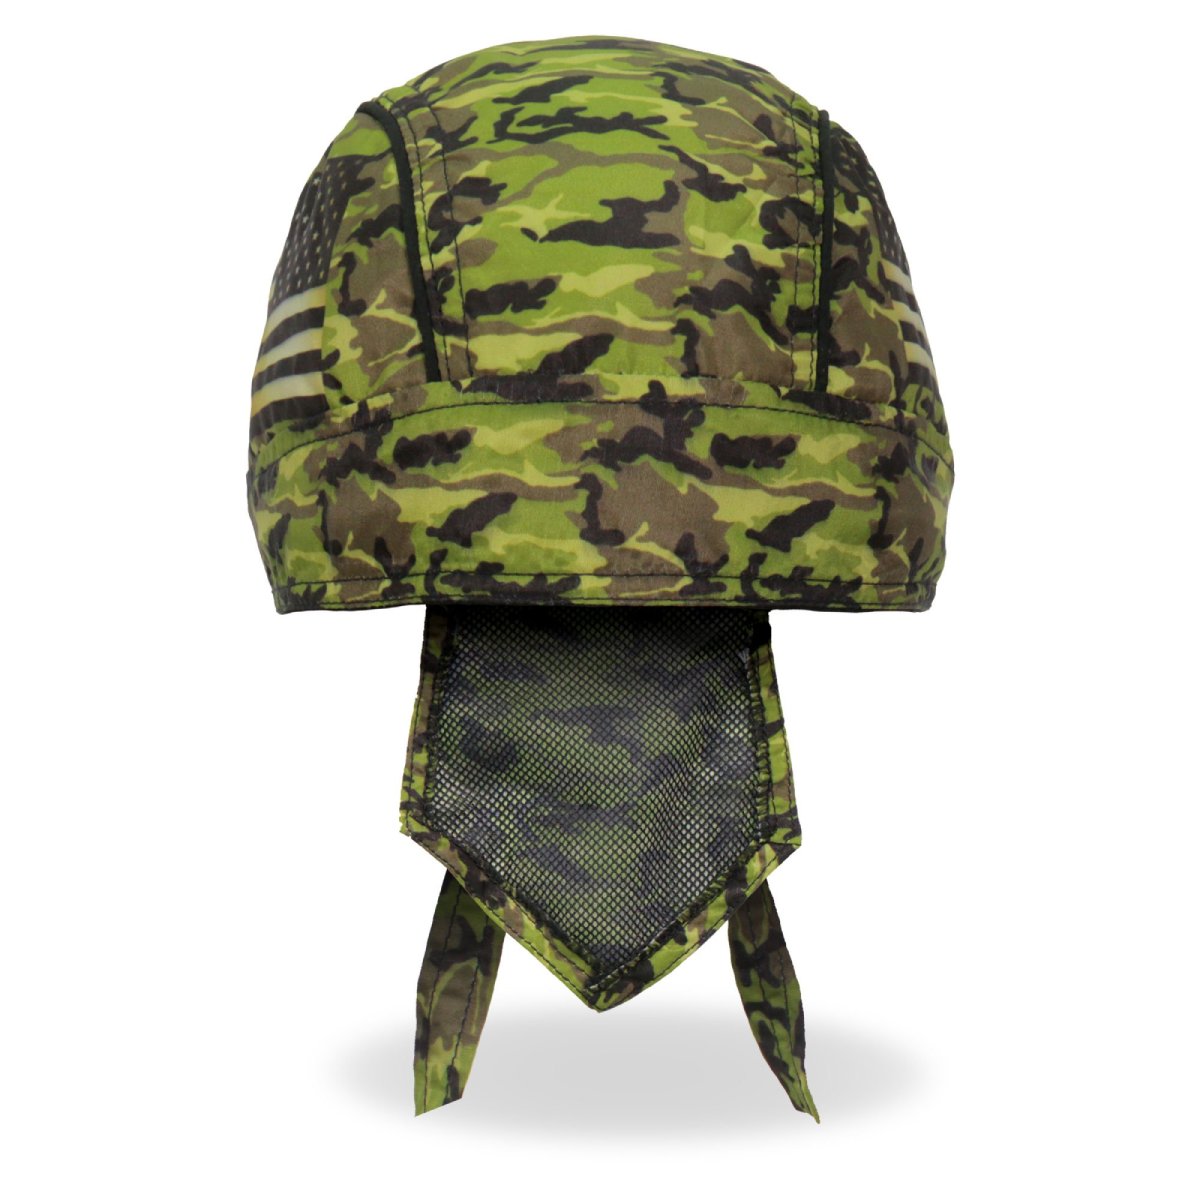 Hot Leathers HWH1112 Camo Flag Headwrap